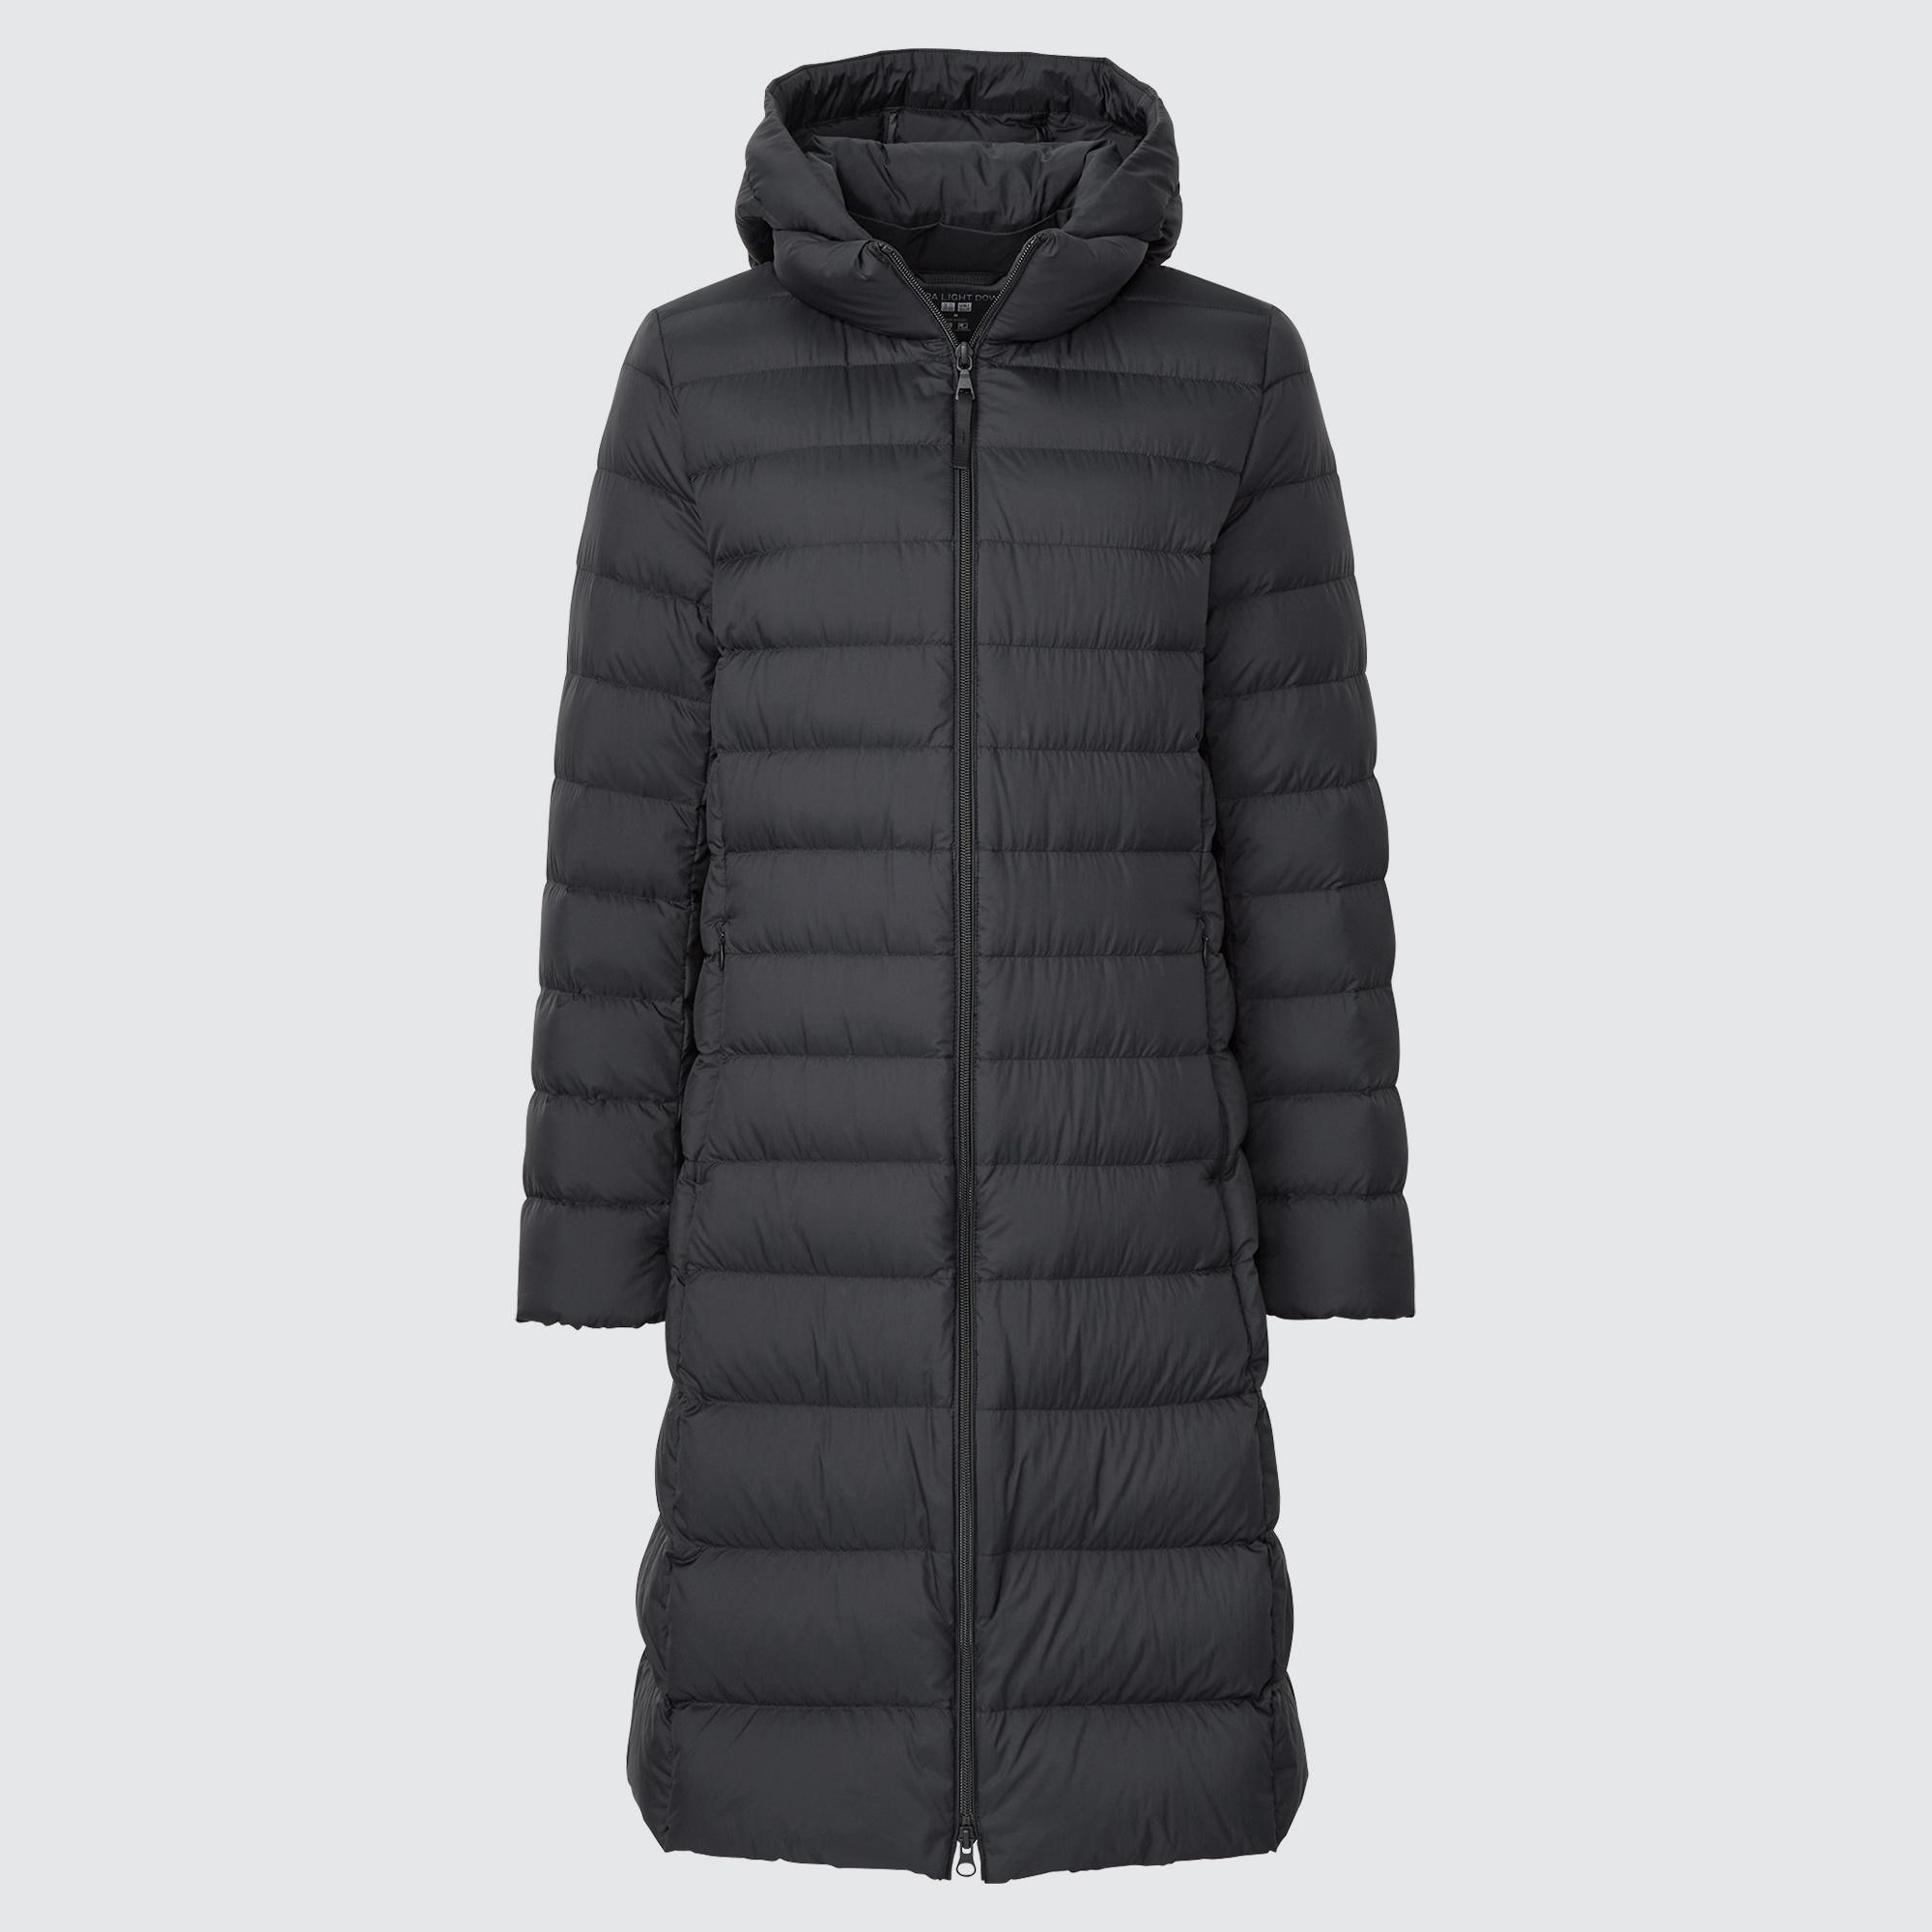 Uniqlo ULTRA LIGHT DOWN JACKET Review 2021 Edition  A Budget Down Jacket  Review  Journey Anywear  Clothing Bag and Gear Reviews